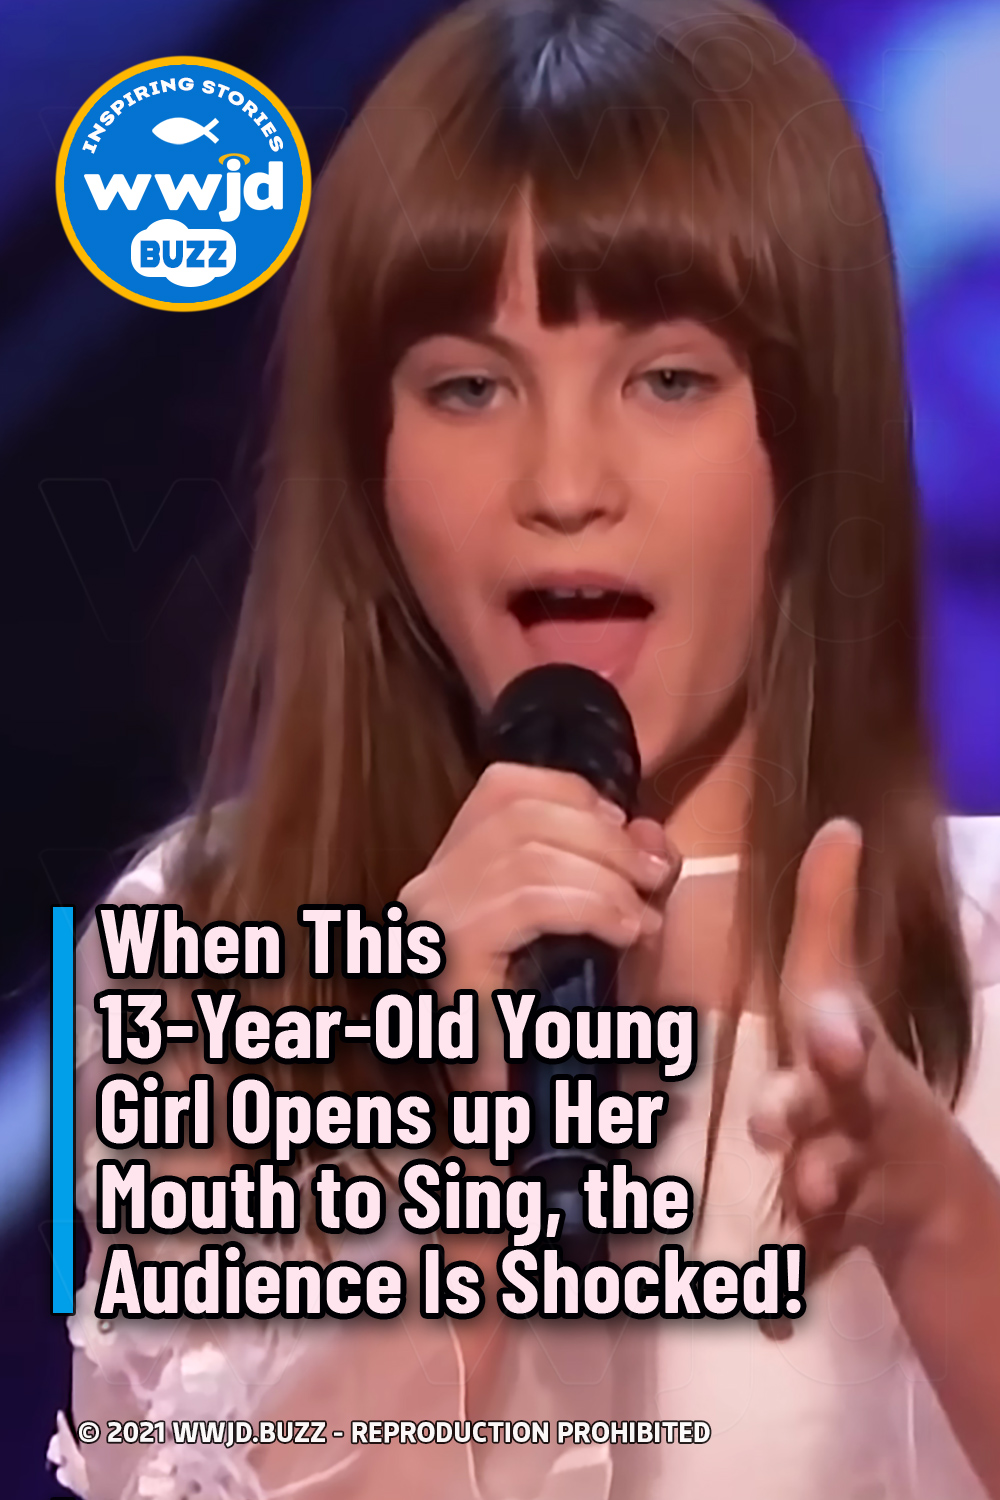 When This 13-Year-Old Young Girl Opens up Her Mouth to Sing, the Audience Is Shocked!